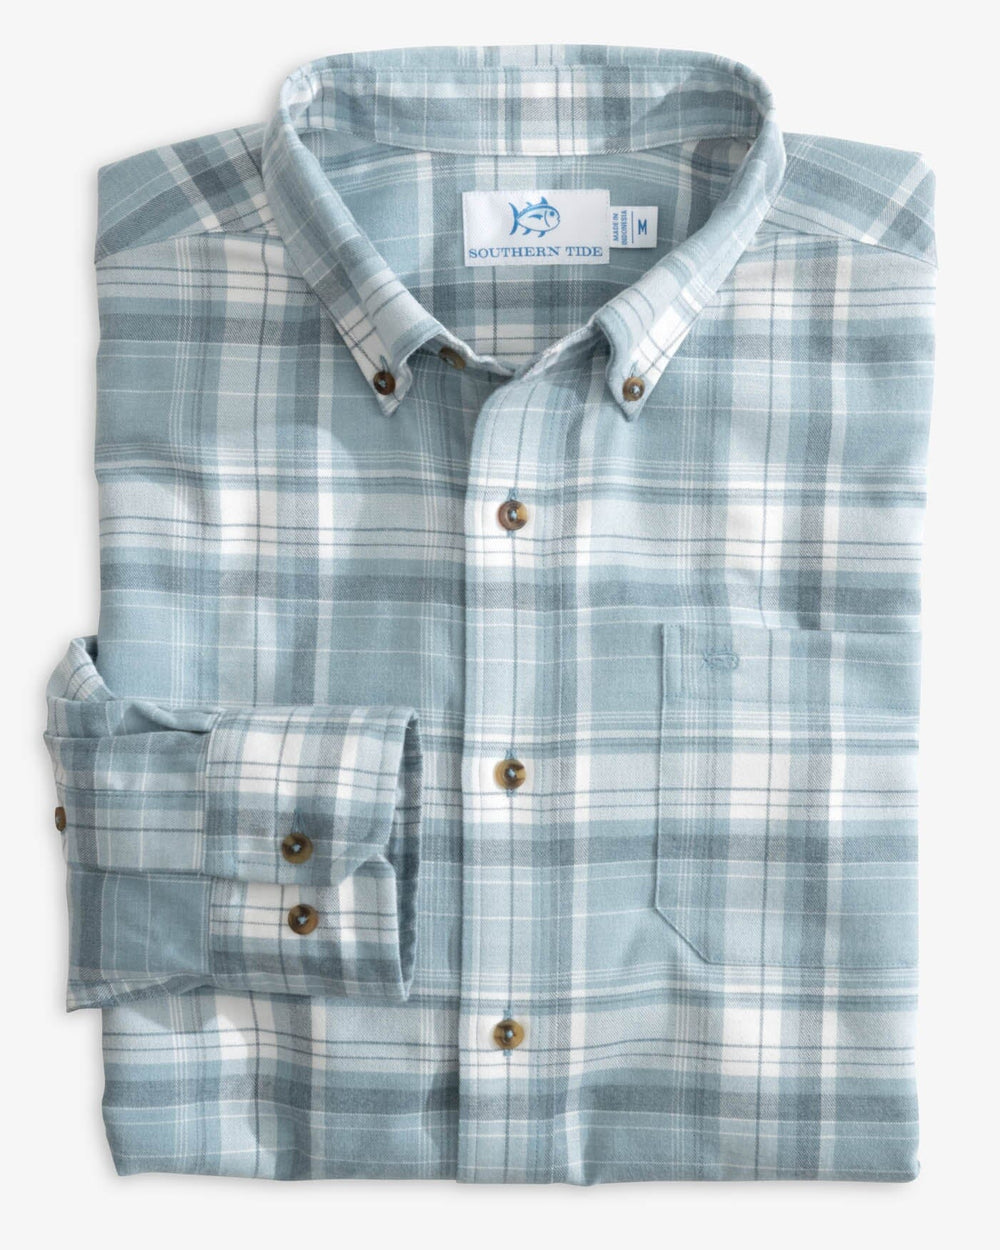 The folded view of the Southern Tide Heather Avondale Plaid Sport Shirt by Southern Tide - Heather Mountain Spring Blue